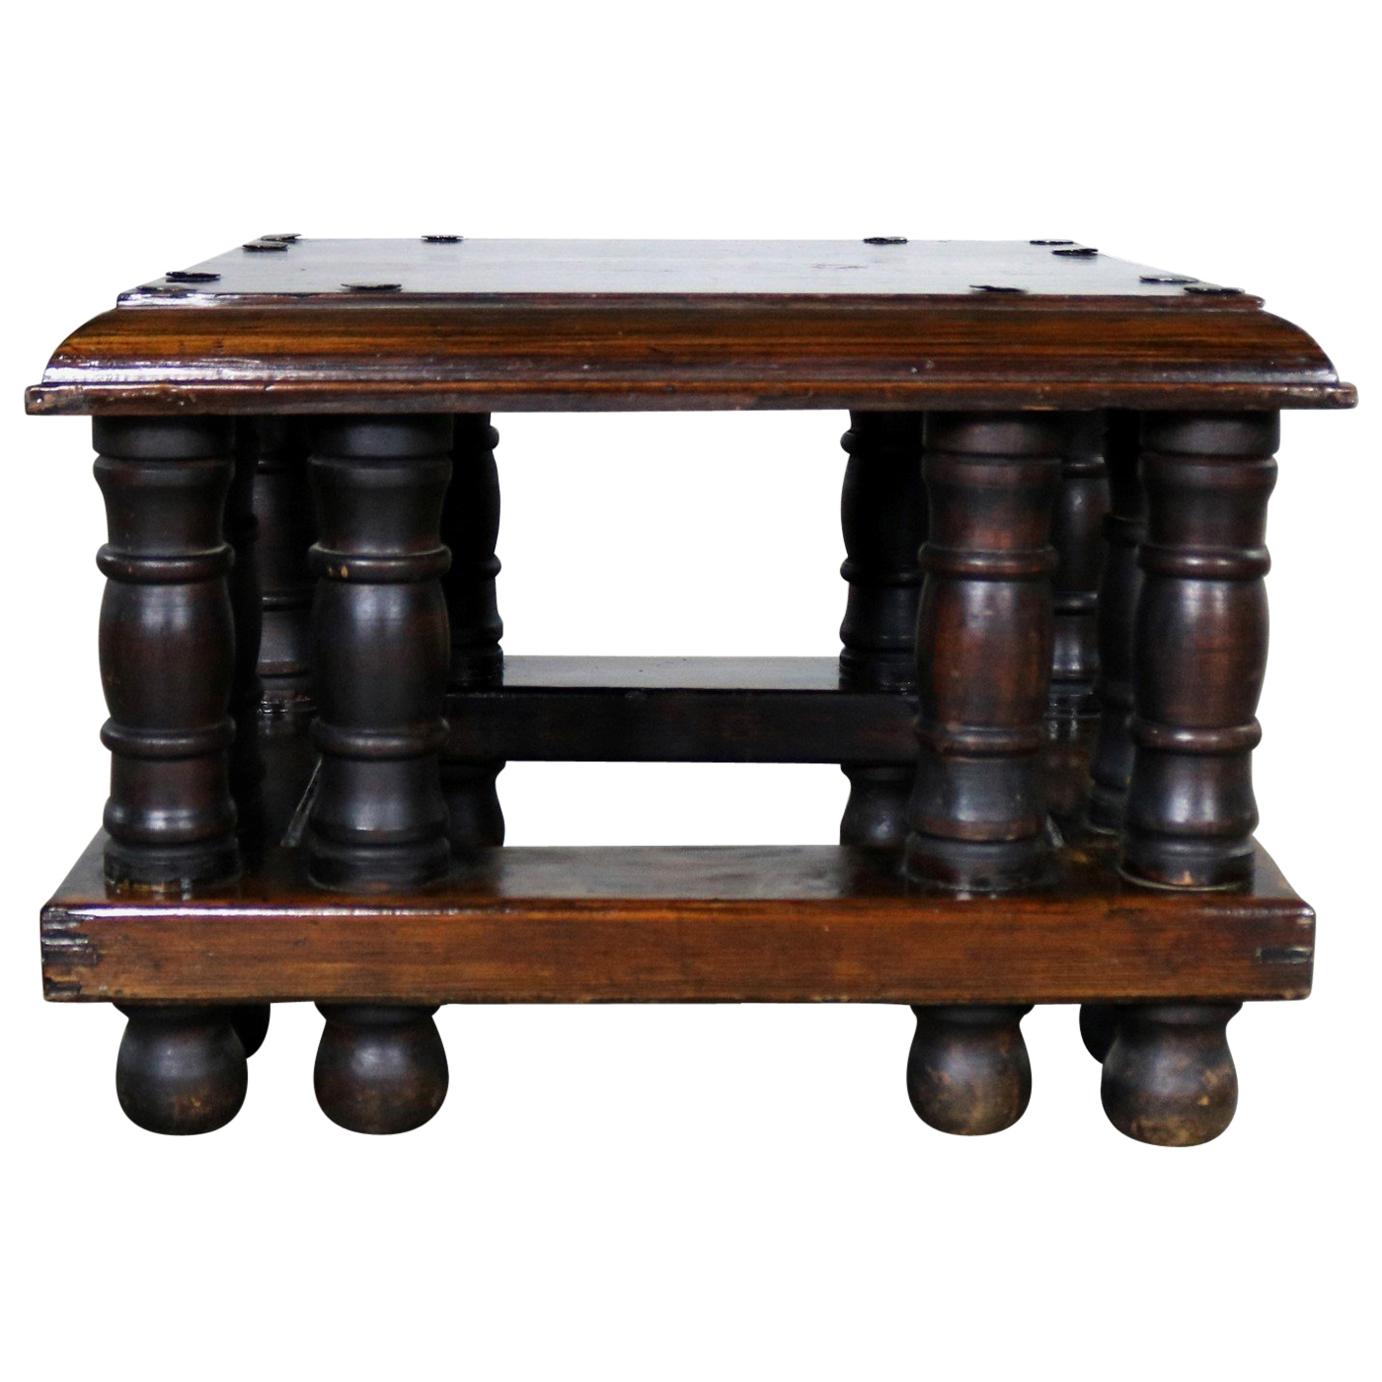 Spanish Style Square End Table with Nailheads by Artes De Mexico Internacionale